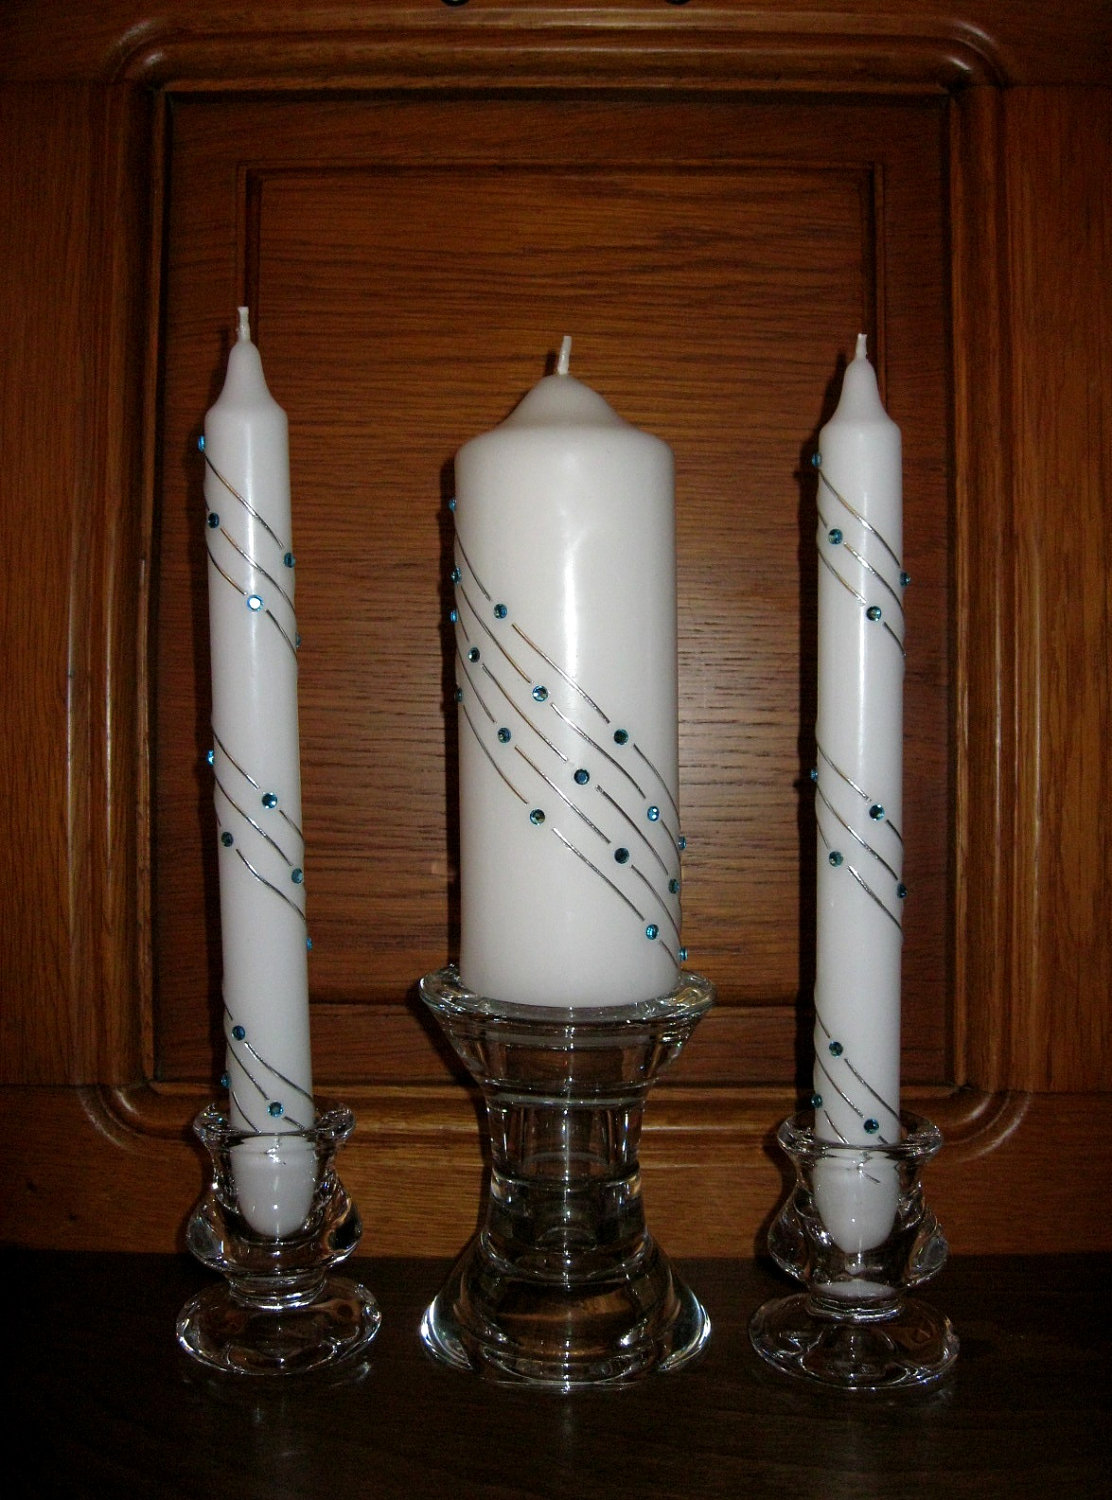 Handmade Wedding Unity Candles With Swarovski Crystals, Pillar Candle, Taper Candles, Personalized Candles, Unity Candle Set